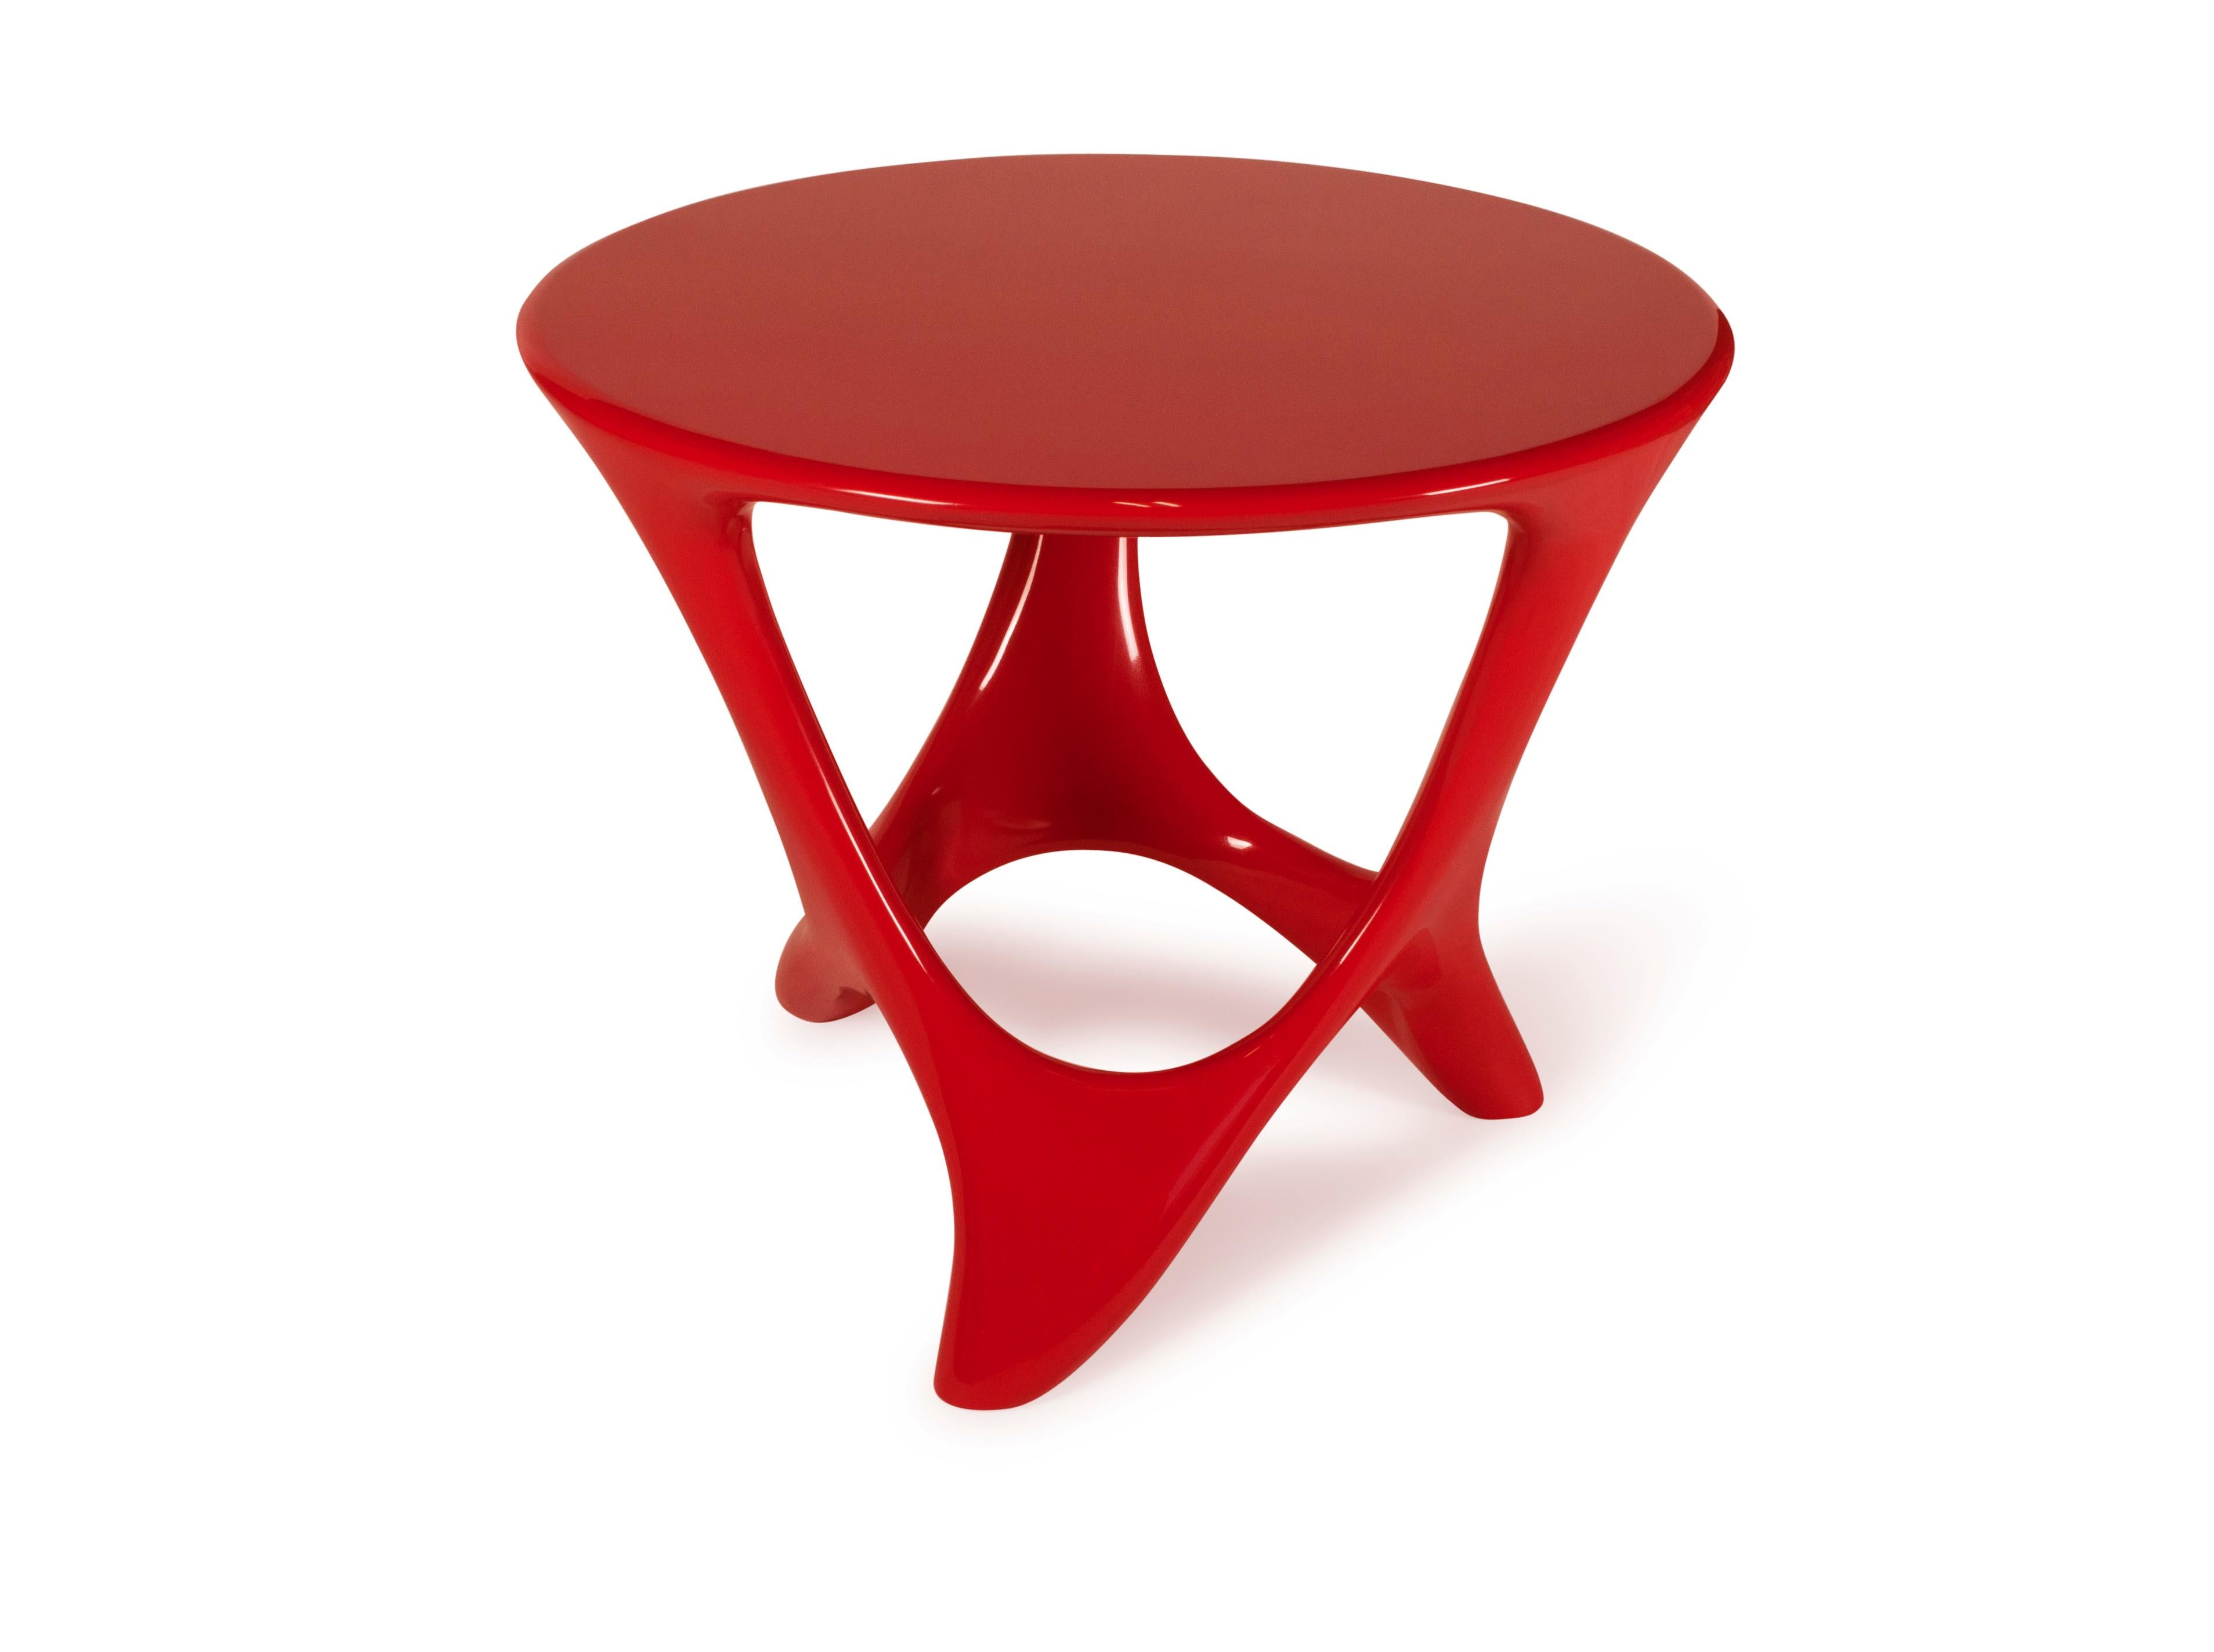 Amorph Alamos Central Table Red Lacquer  In New Condition For Sale In Los Angeles, CA